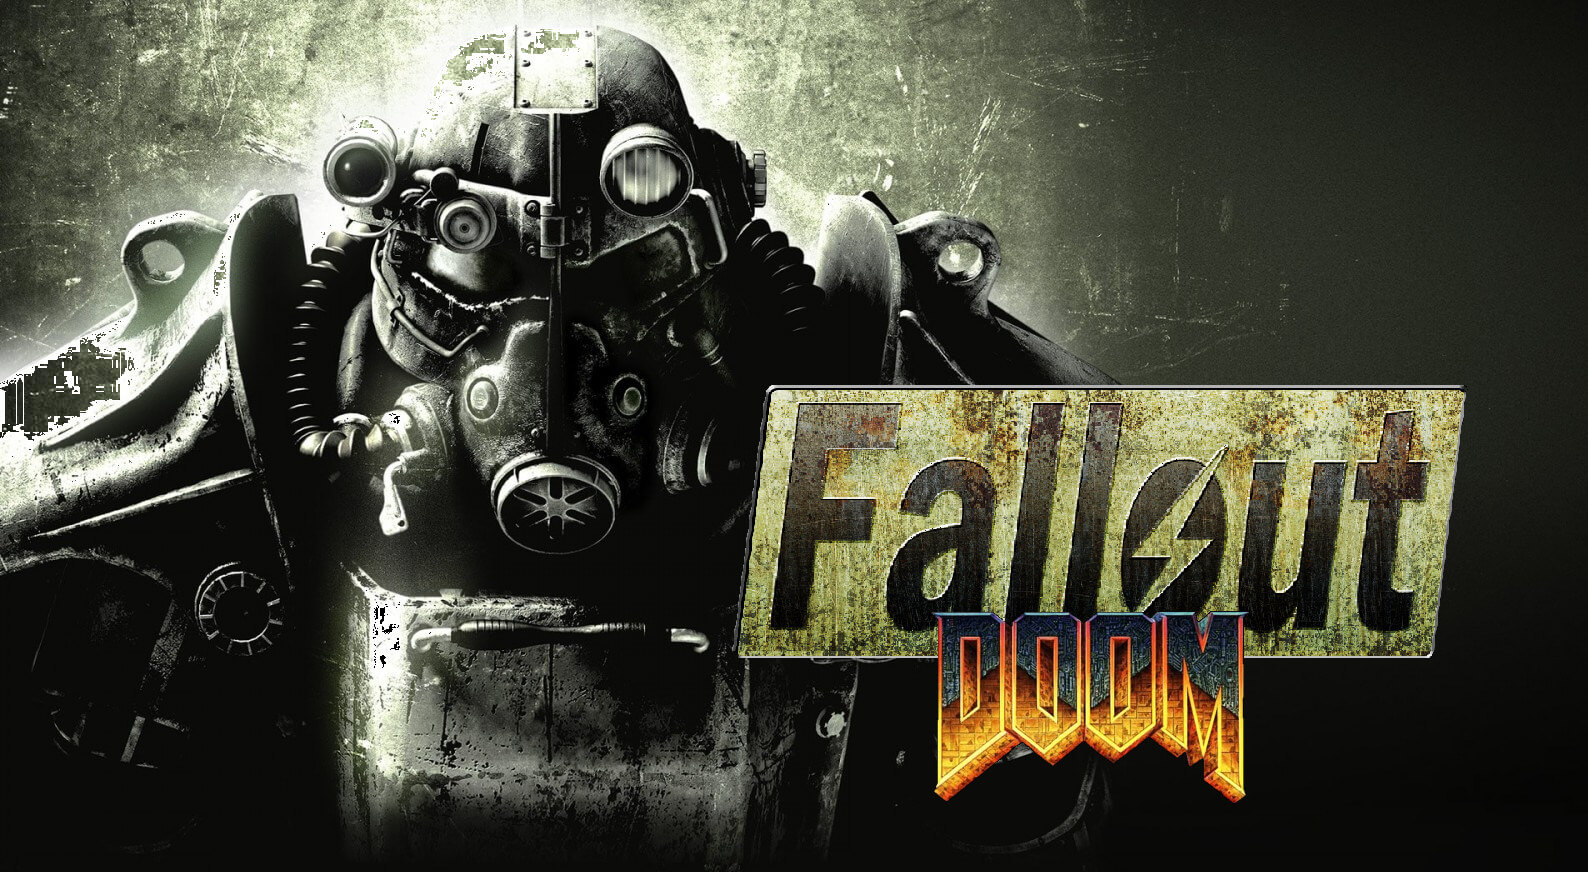 You have no fallout ini file please run fallout 4 to initialize (119) фото